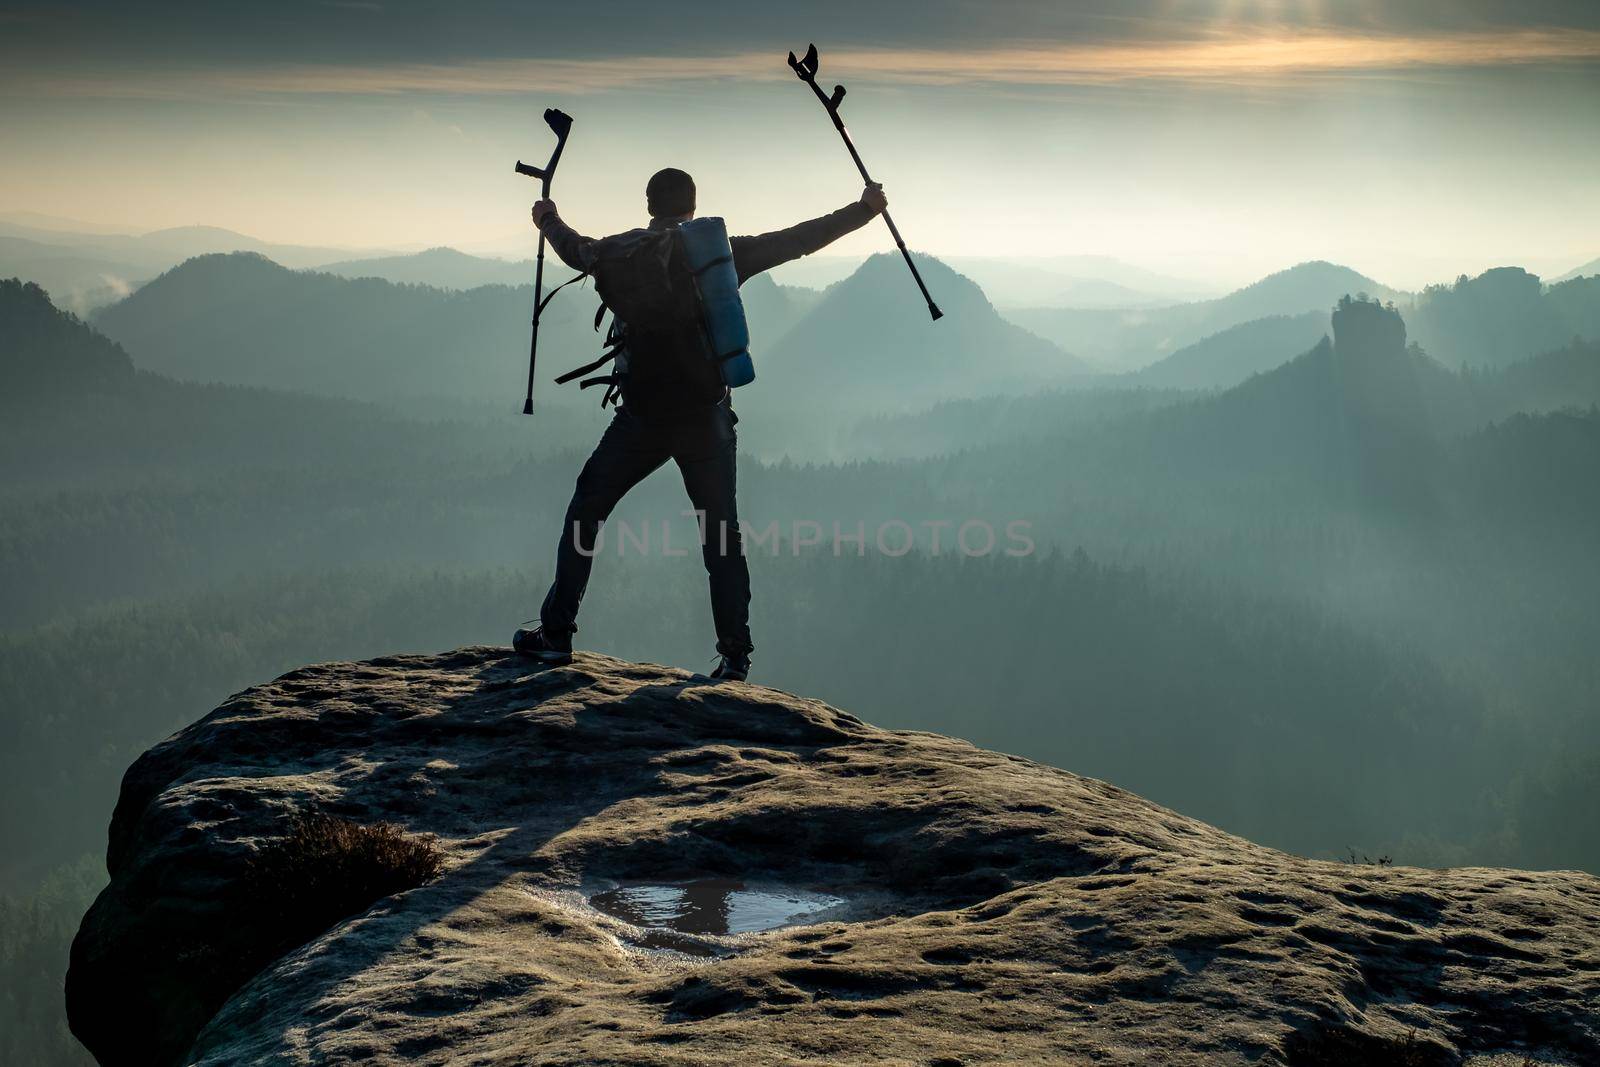 Silhouette of happy man with arms outstretched holding crutches standing by mountain valley  during sunset. Personal motivation